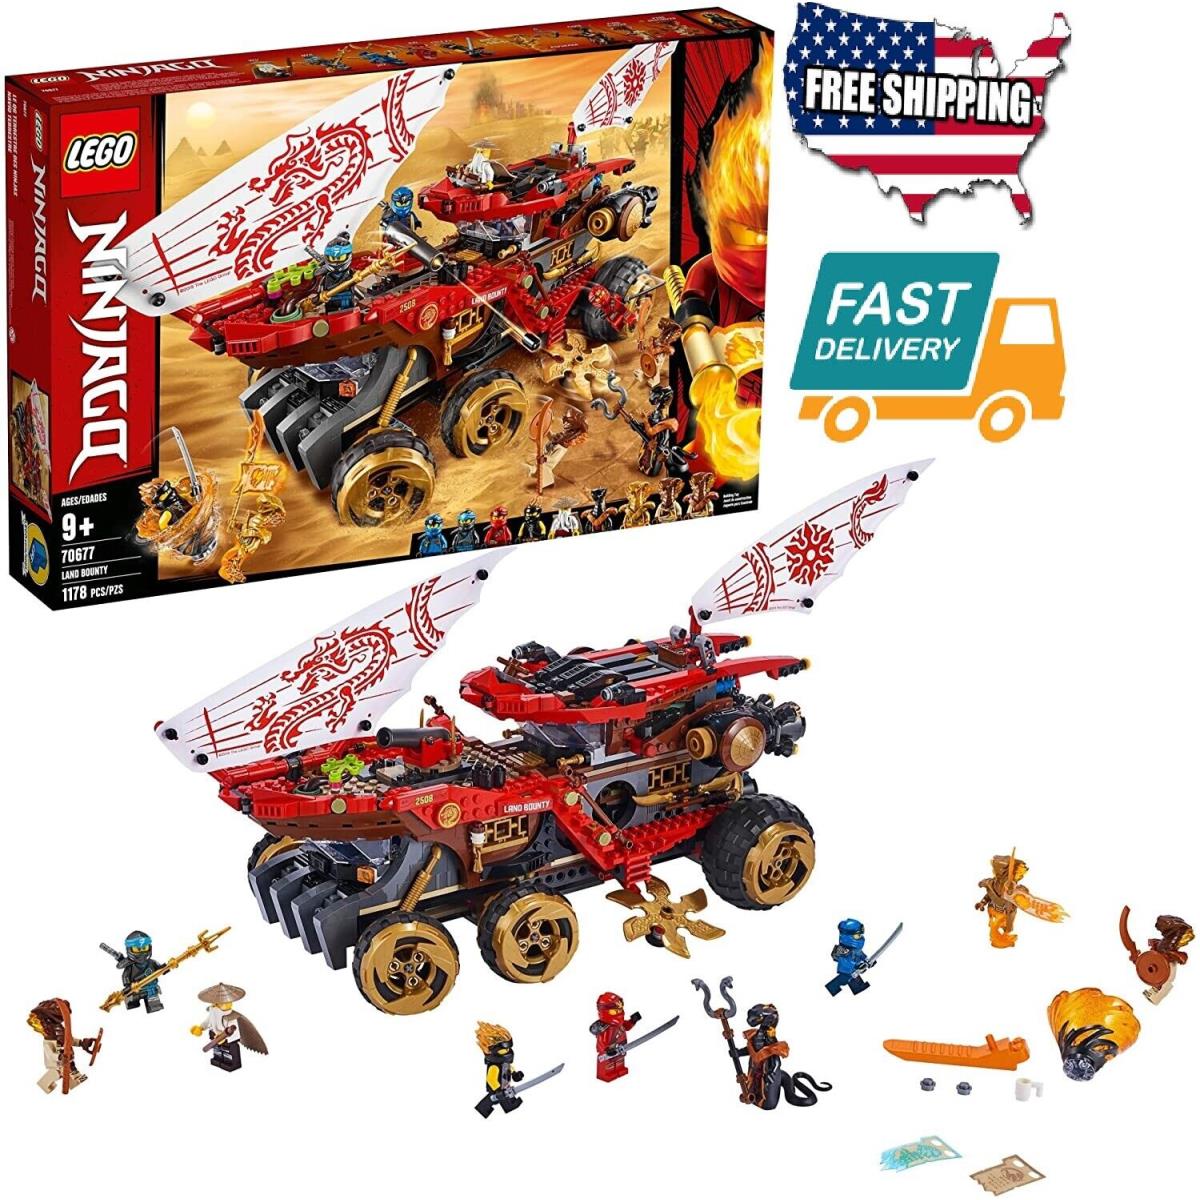 1178 Pieces Home Kids Toy Lego Ninjago Land Bounty 70677 Toy Truck Building Set